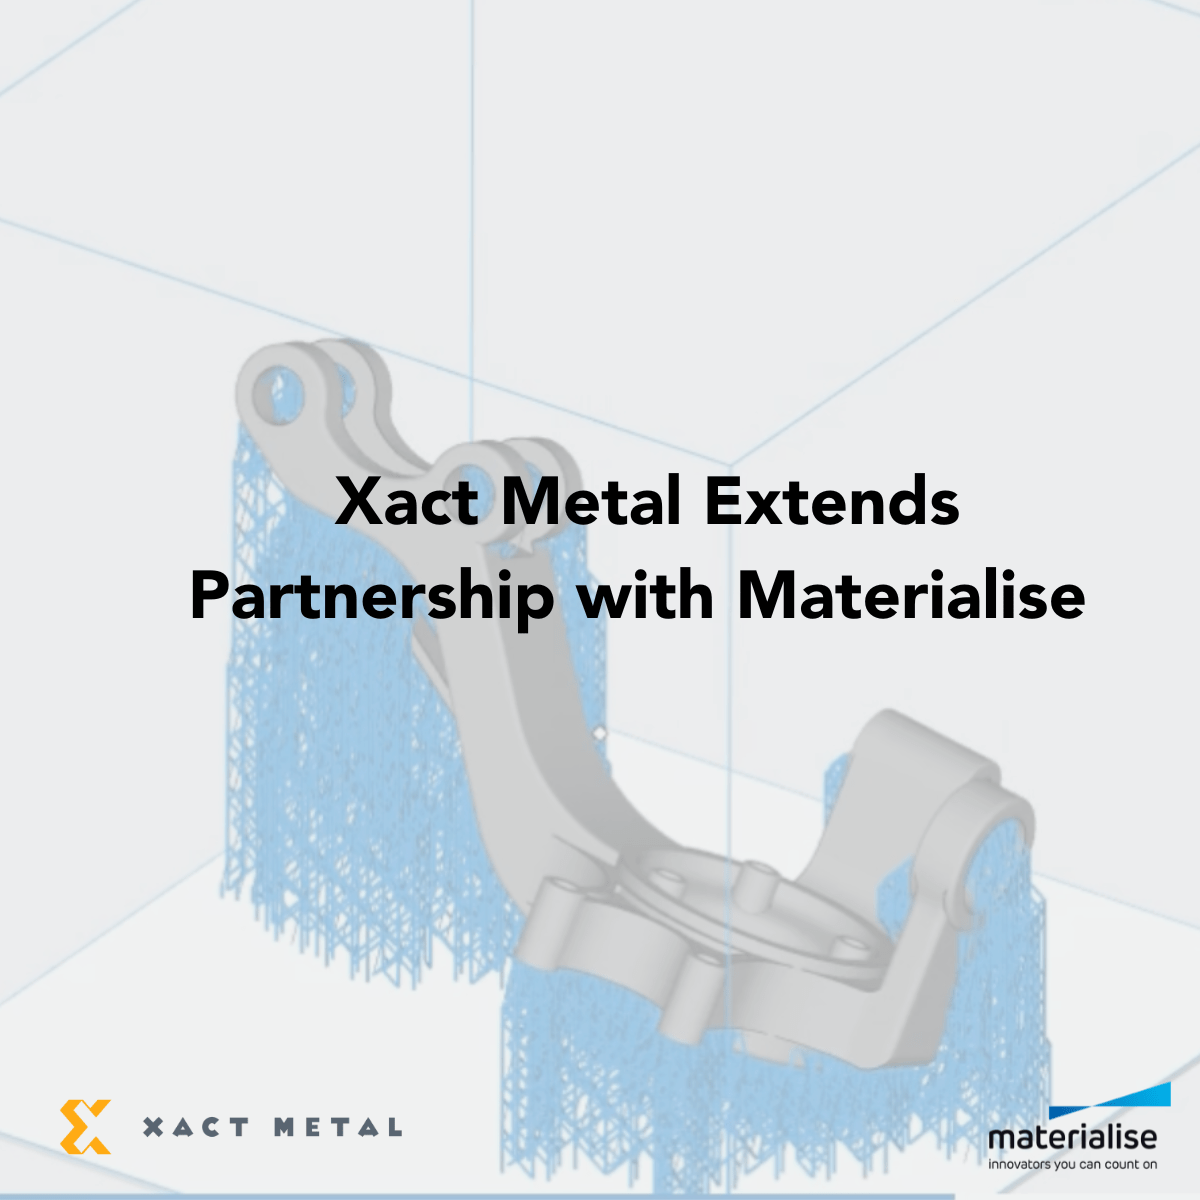 Materialise Extends Partnership with Xact Metal